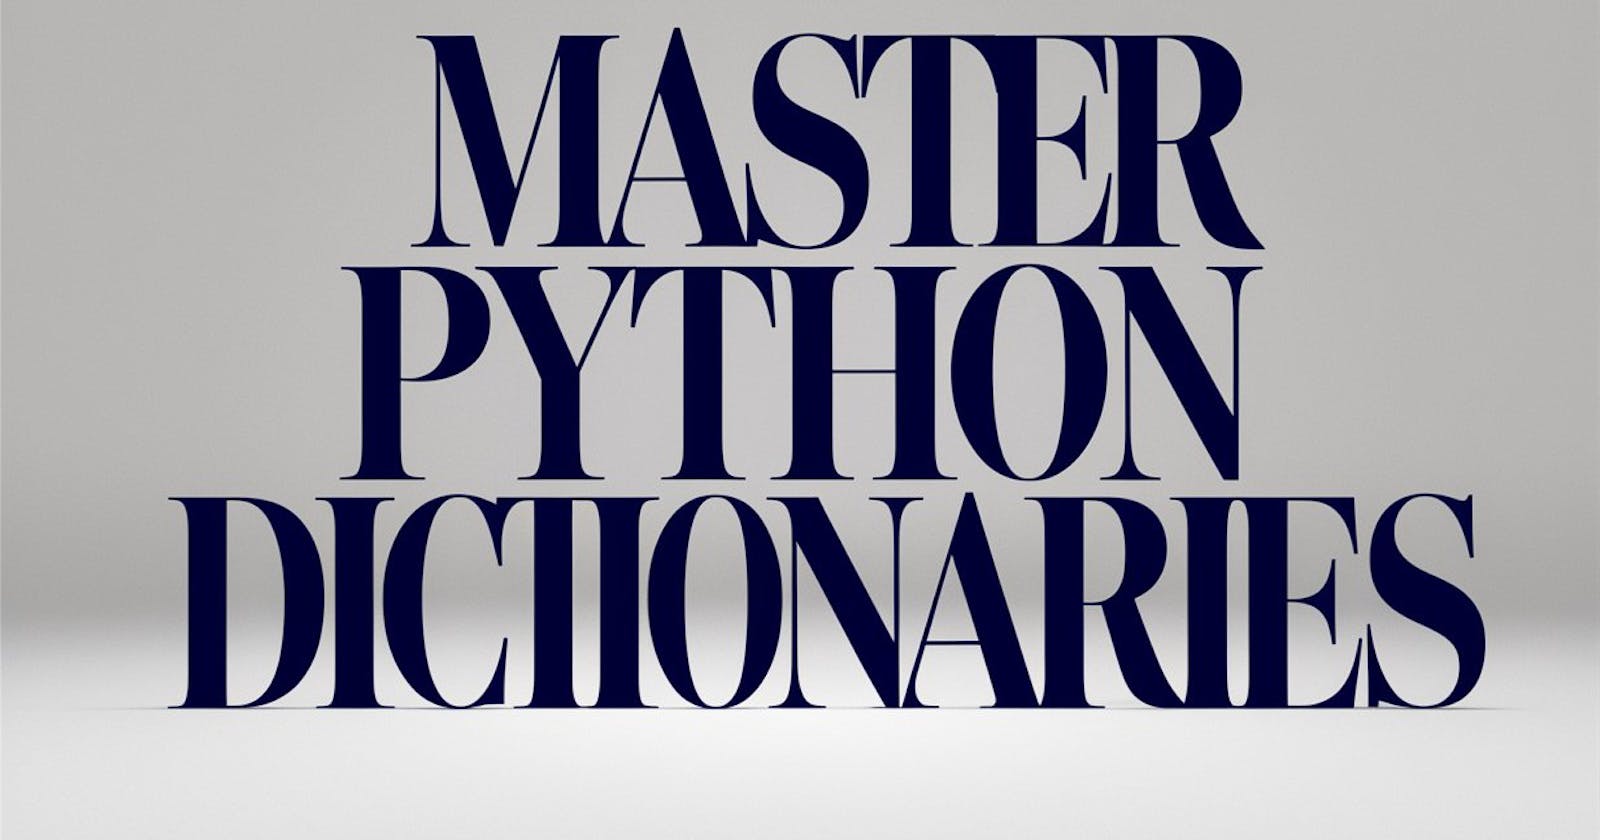 Master Python Dictionaries with These 30 Multiple Choice Questions